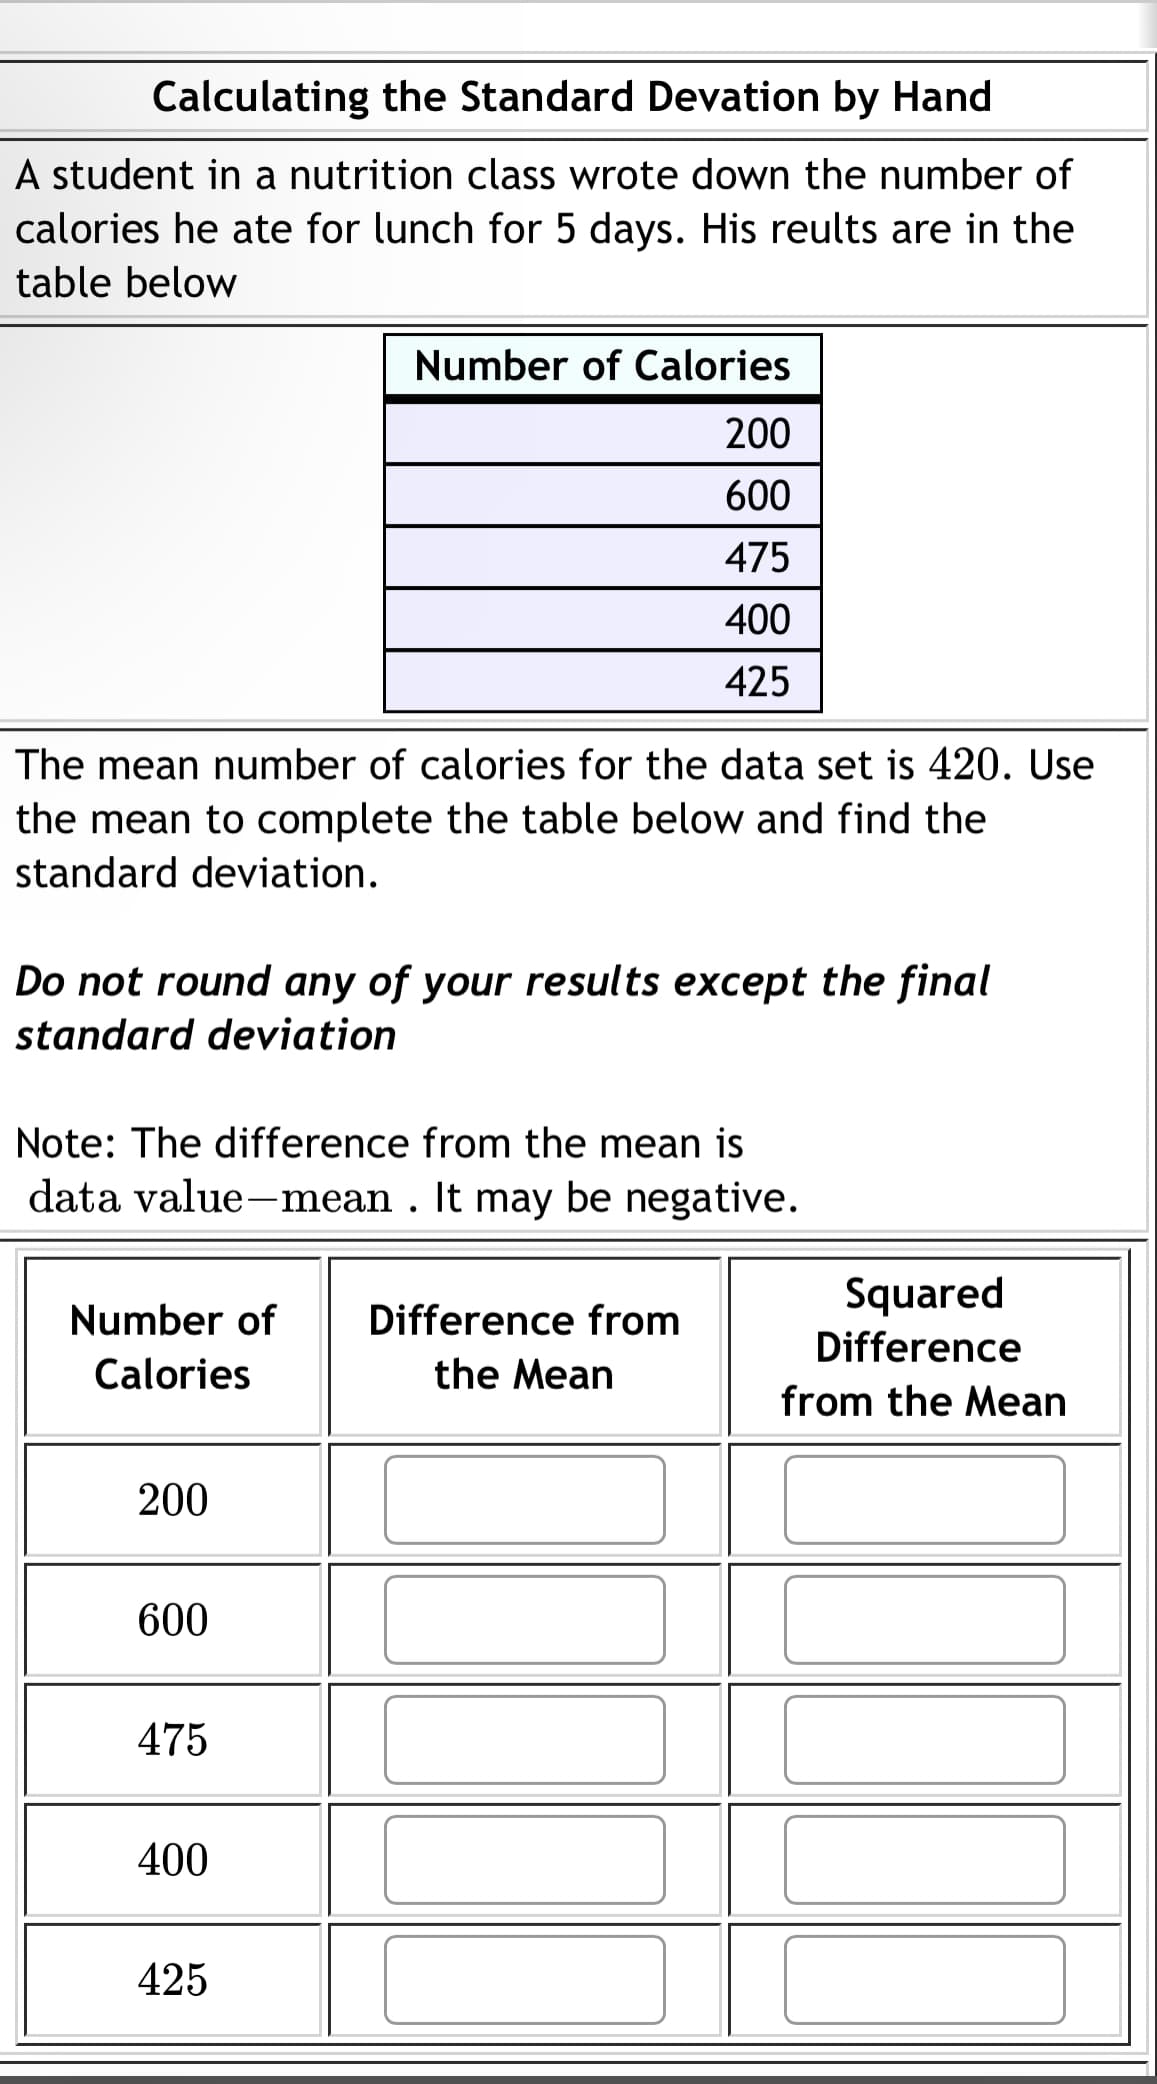 Calculating the Standard Devation by Hand
A student in a nutrition class wrote down the number of
calories he ate for lunch for 5 days. His reults are in the
table below
The mean number of calories for the data set is 420. Use
the mean to complete the table below and find the
standard deviation.
Do not round any of your results except the final
standard deviation
Note: The difference from the mean is
data value-mean. It may be negative.
Number of Difference from
Calories
the Mean
200
Number of Calories
200
600
475
400
425
600
475
400
425
Squared
Difference
from the Mean